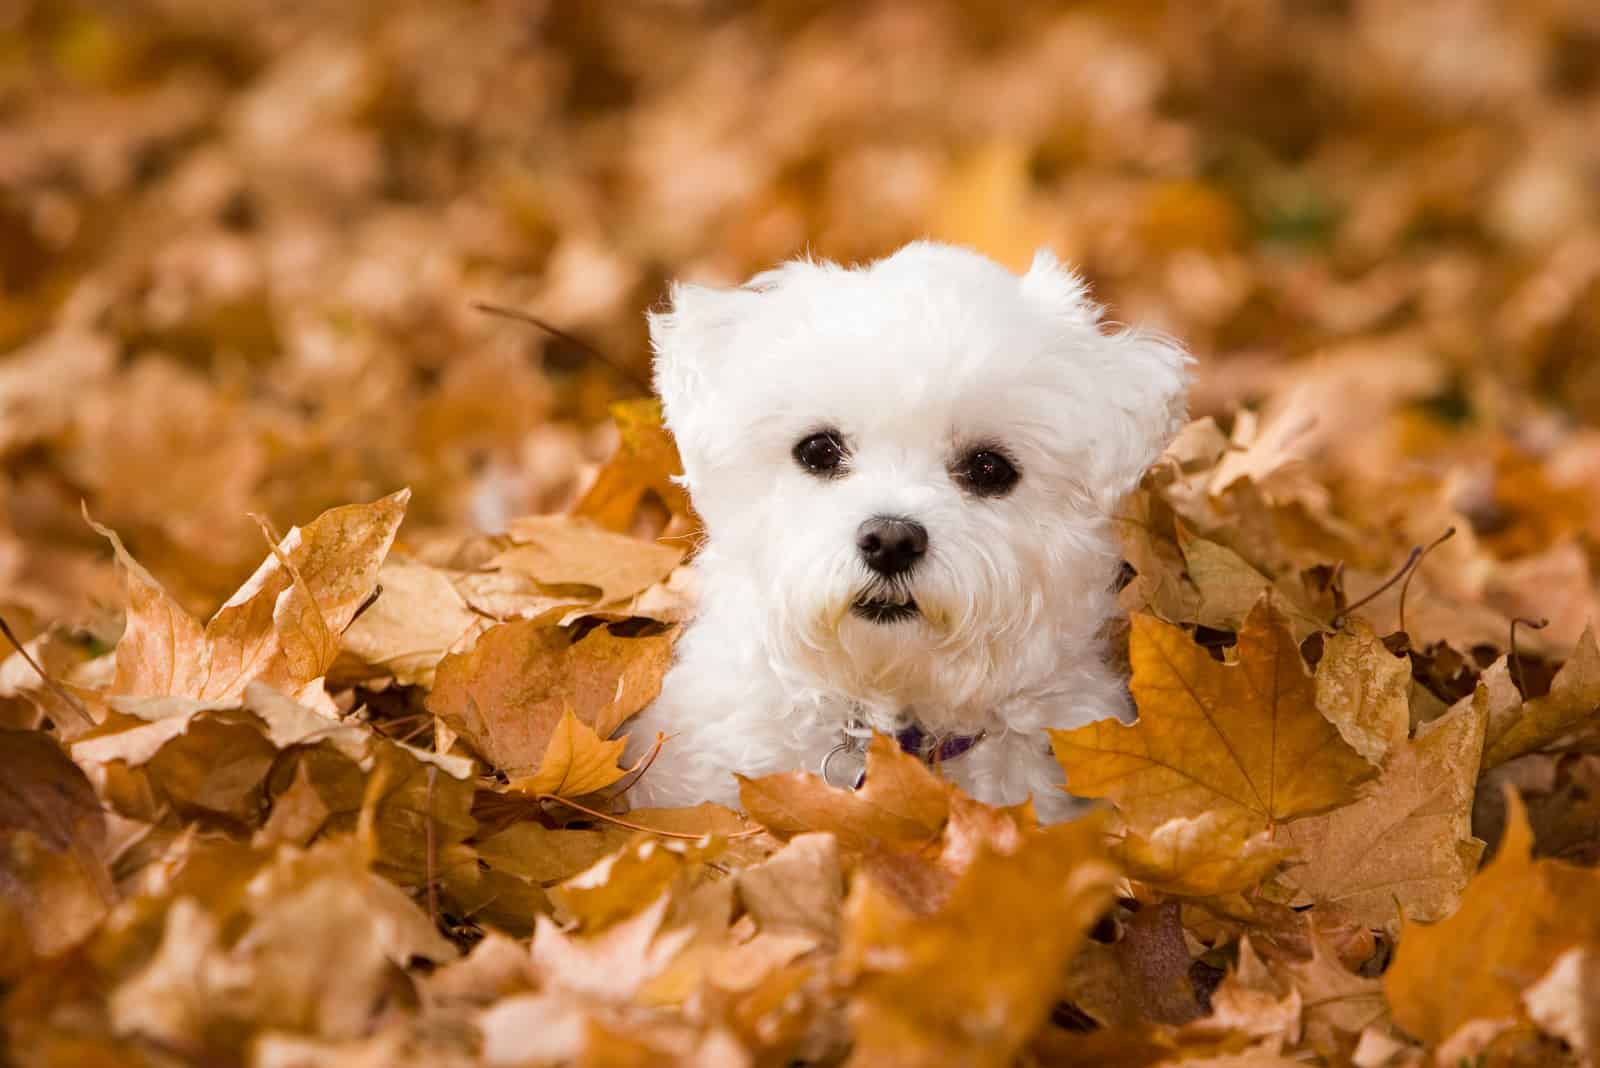 Maltese in leaves looking up at camera